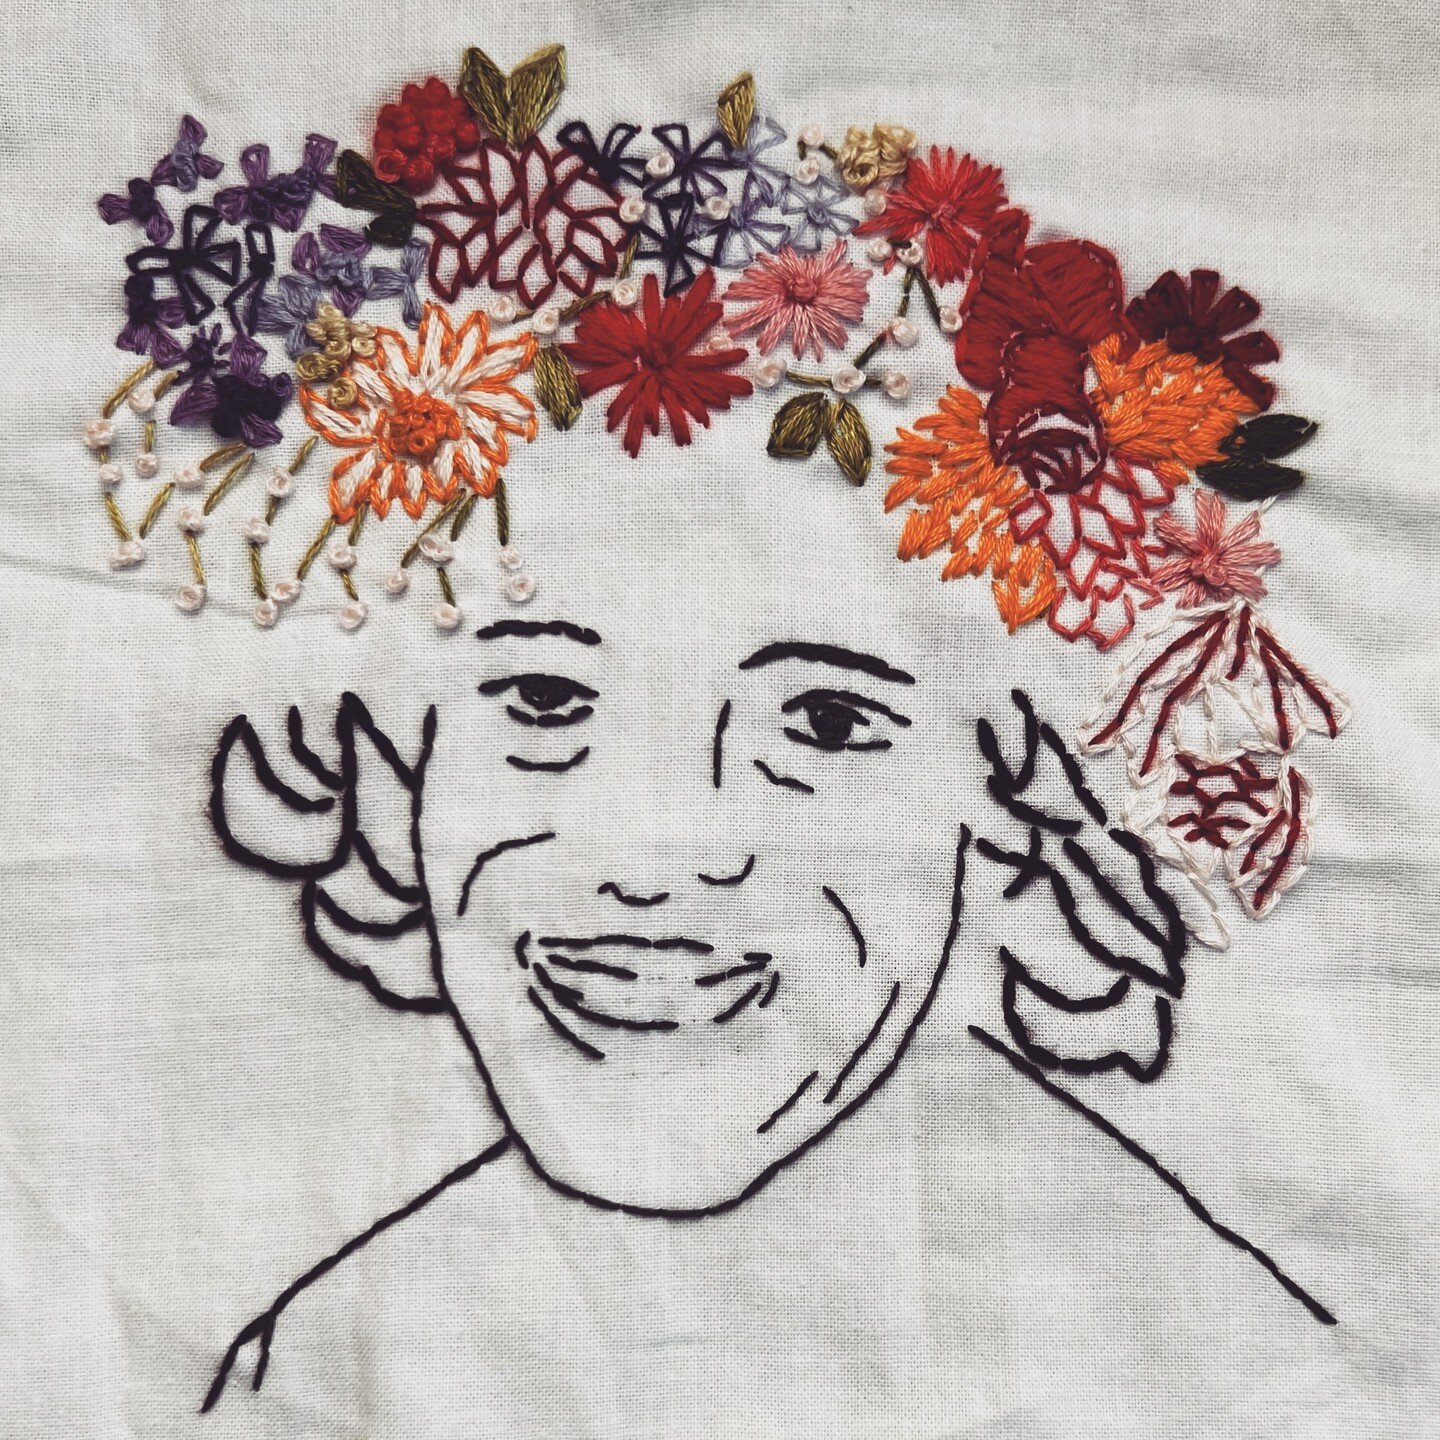 Happy Trans Day of Visibility! 
I embroidered this portrait of Marsha P. Johnson for the Crafting Change Strong Women community quilt
#TDOV #TransDayOfVIsibility #CraftInArtTherapy #CommunityArtTherapy

[ID: an embroidery of Marsha P. Johnson in blac